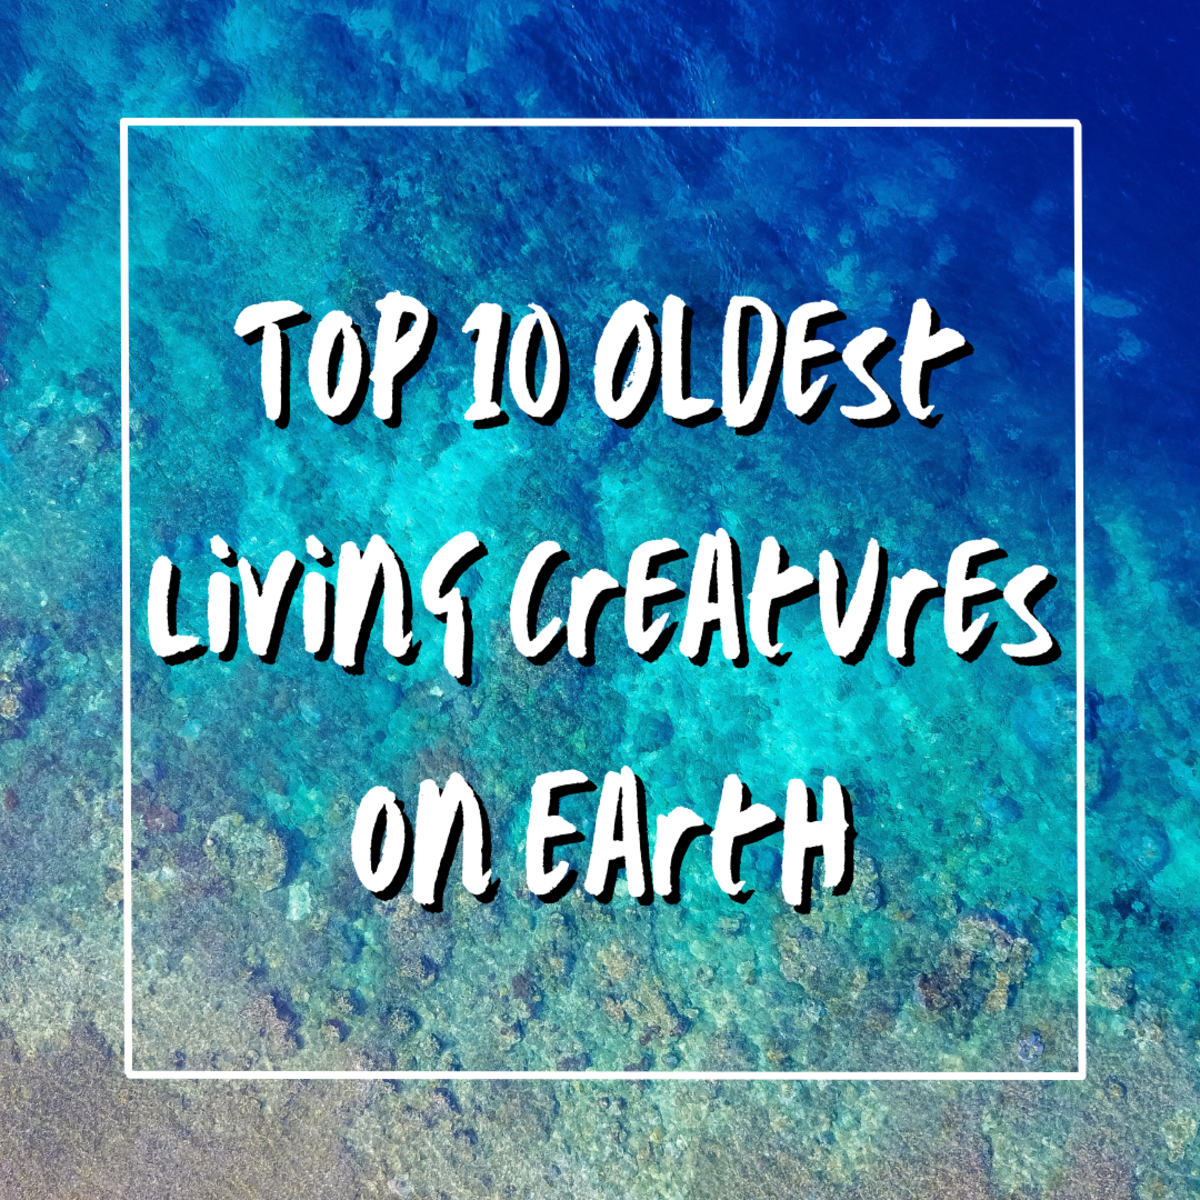 This article covers 10 of the oldest living creatures on Earth. Read on to learn all about these fascinating creatures!